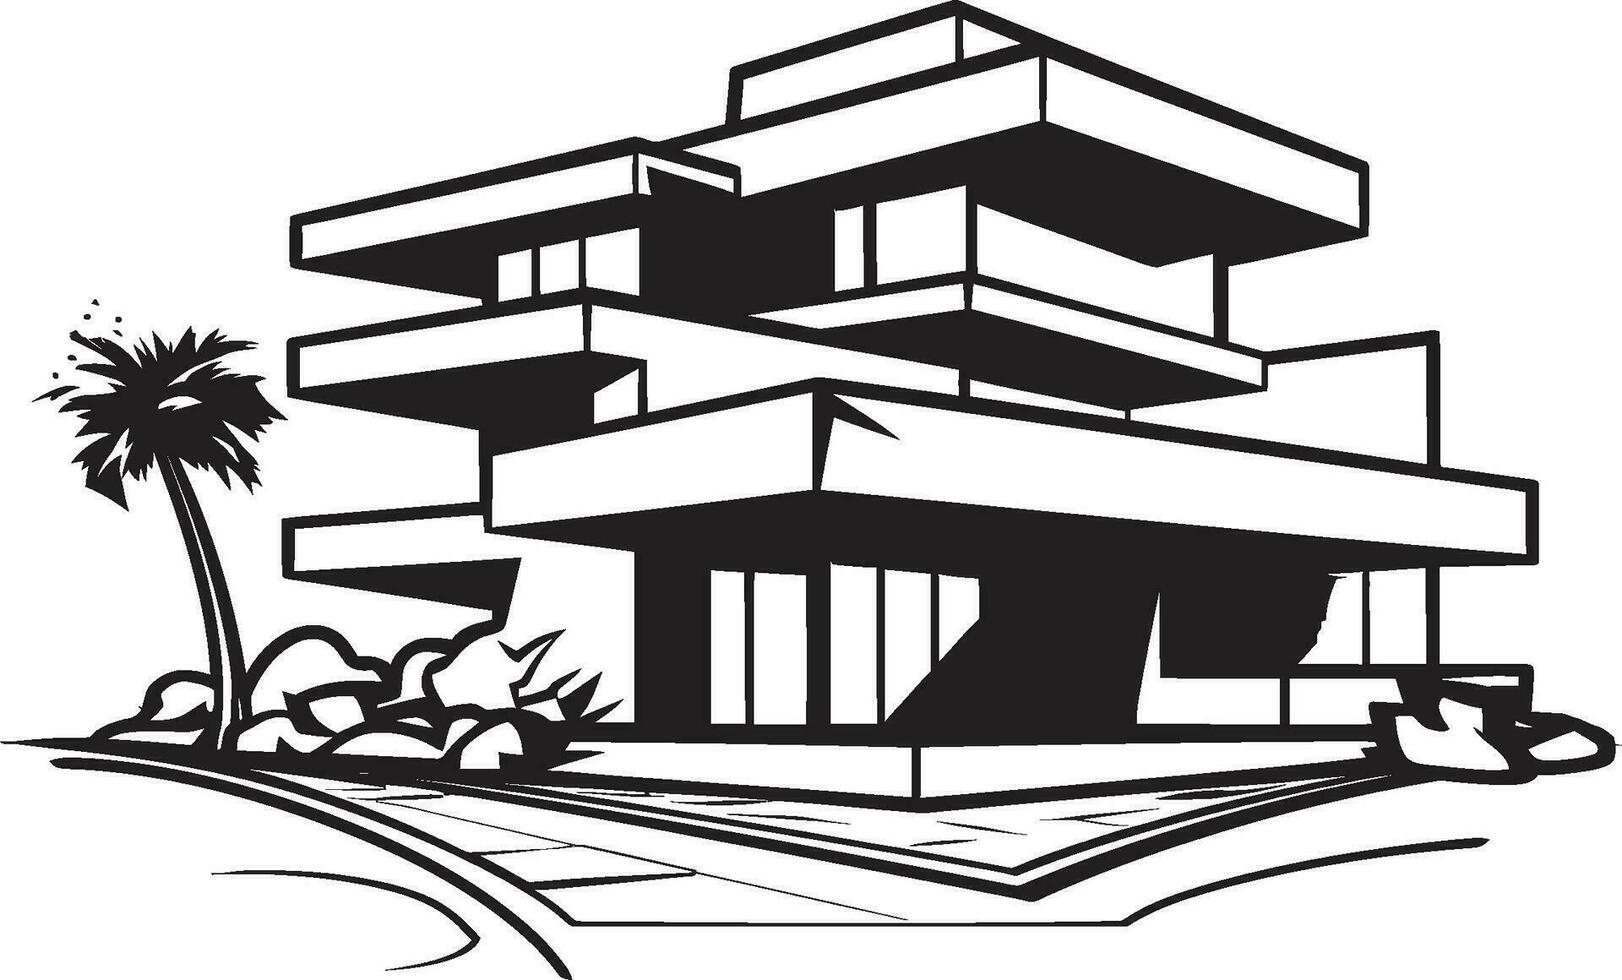 Vigorous Residence Mark Thick Outlined House Design Icon Mighty Living Symbol Bold House Sketch in Vector Format